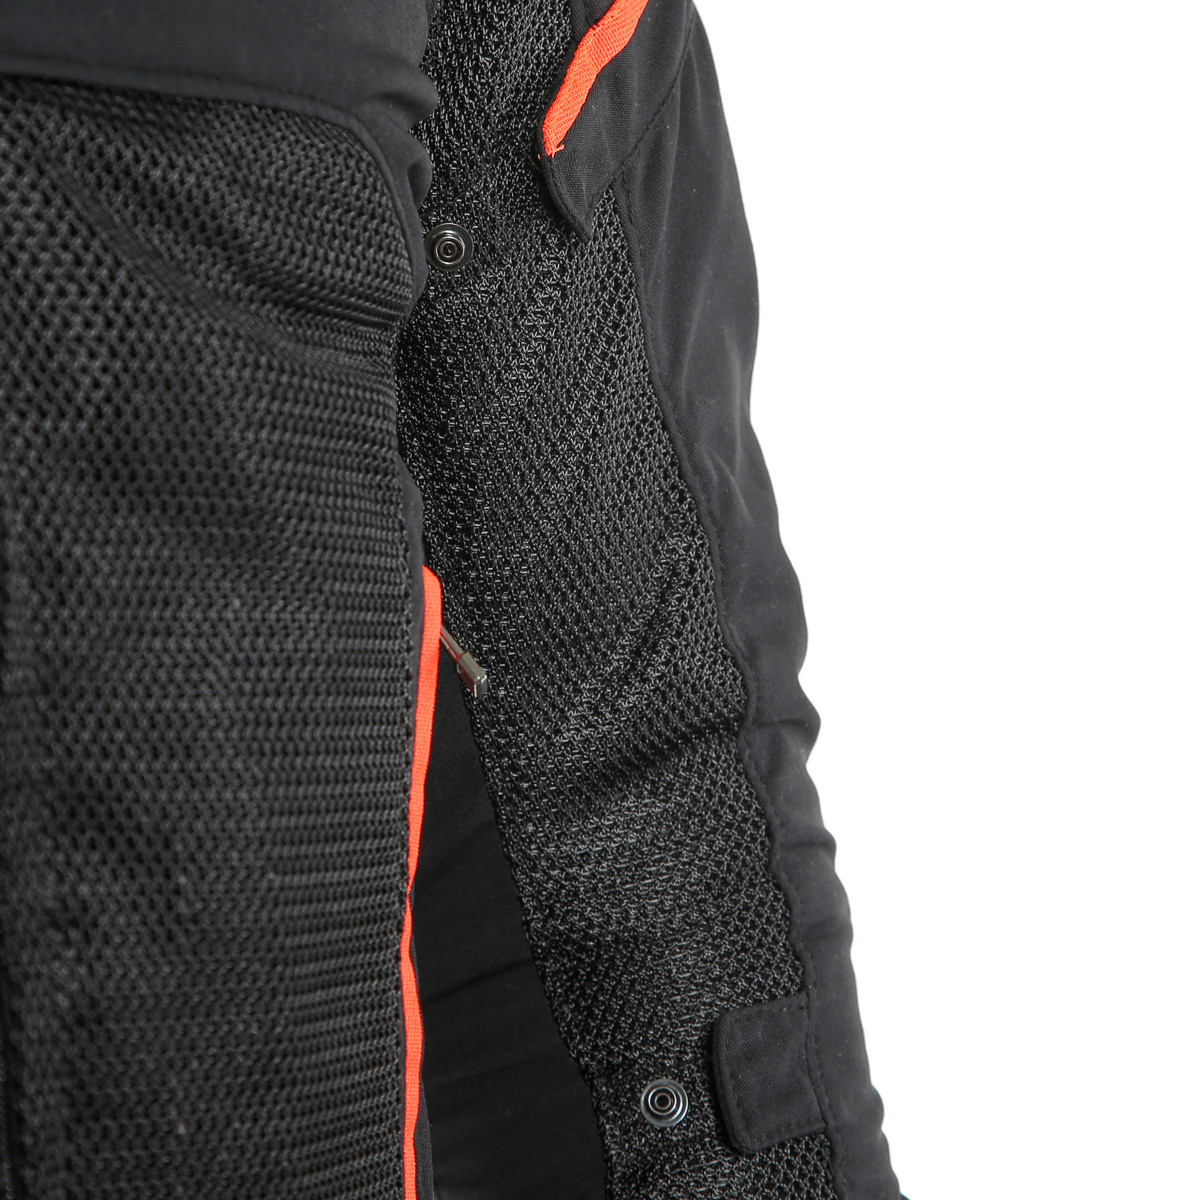 Air Frame D1 Tex Jacket: textile motorcycle jacket - Dainese (Official ...